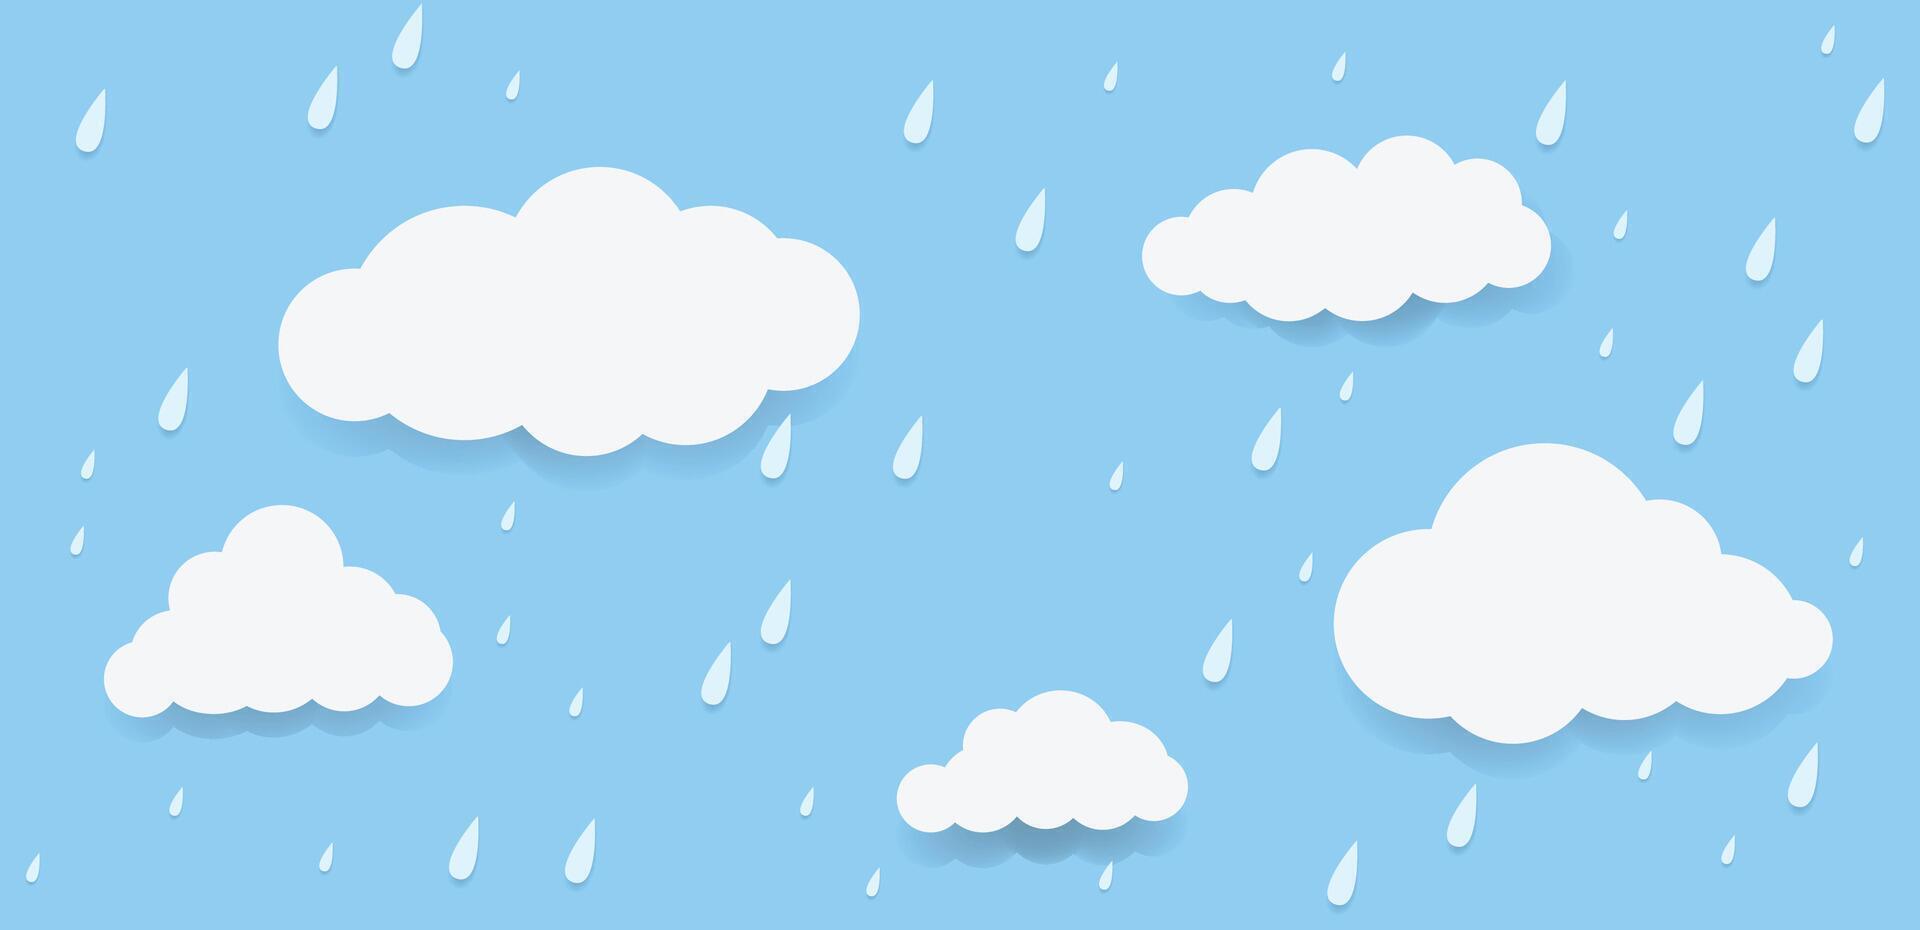 Cloud and rain, rainy season, weather nature background, Flood natural disaster vector